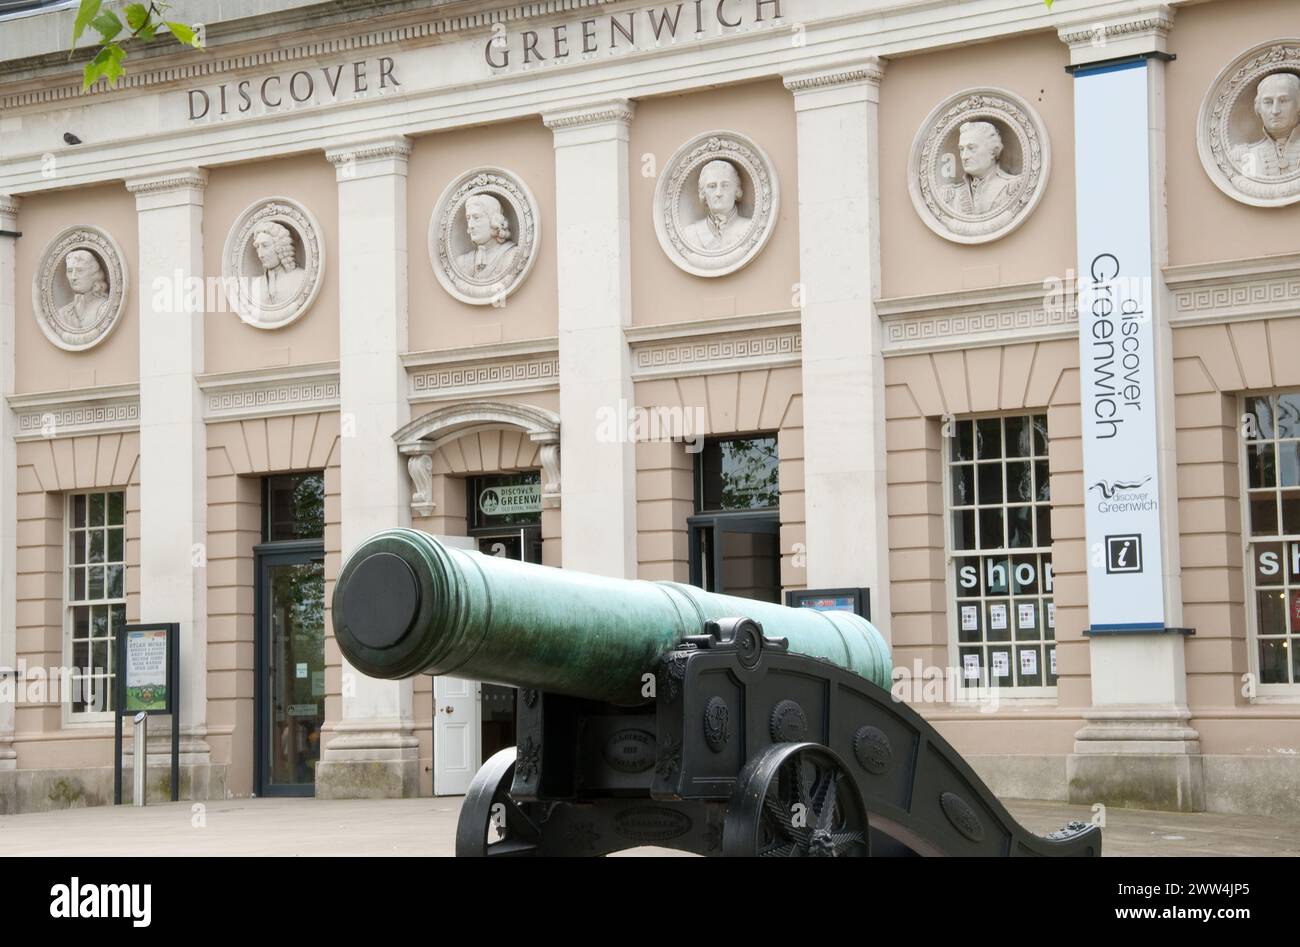 Discover Greenwich, Royal Navy College,  Greenwich, South London, UK Stock Photo